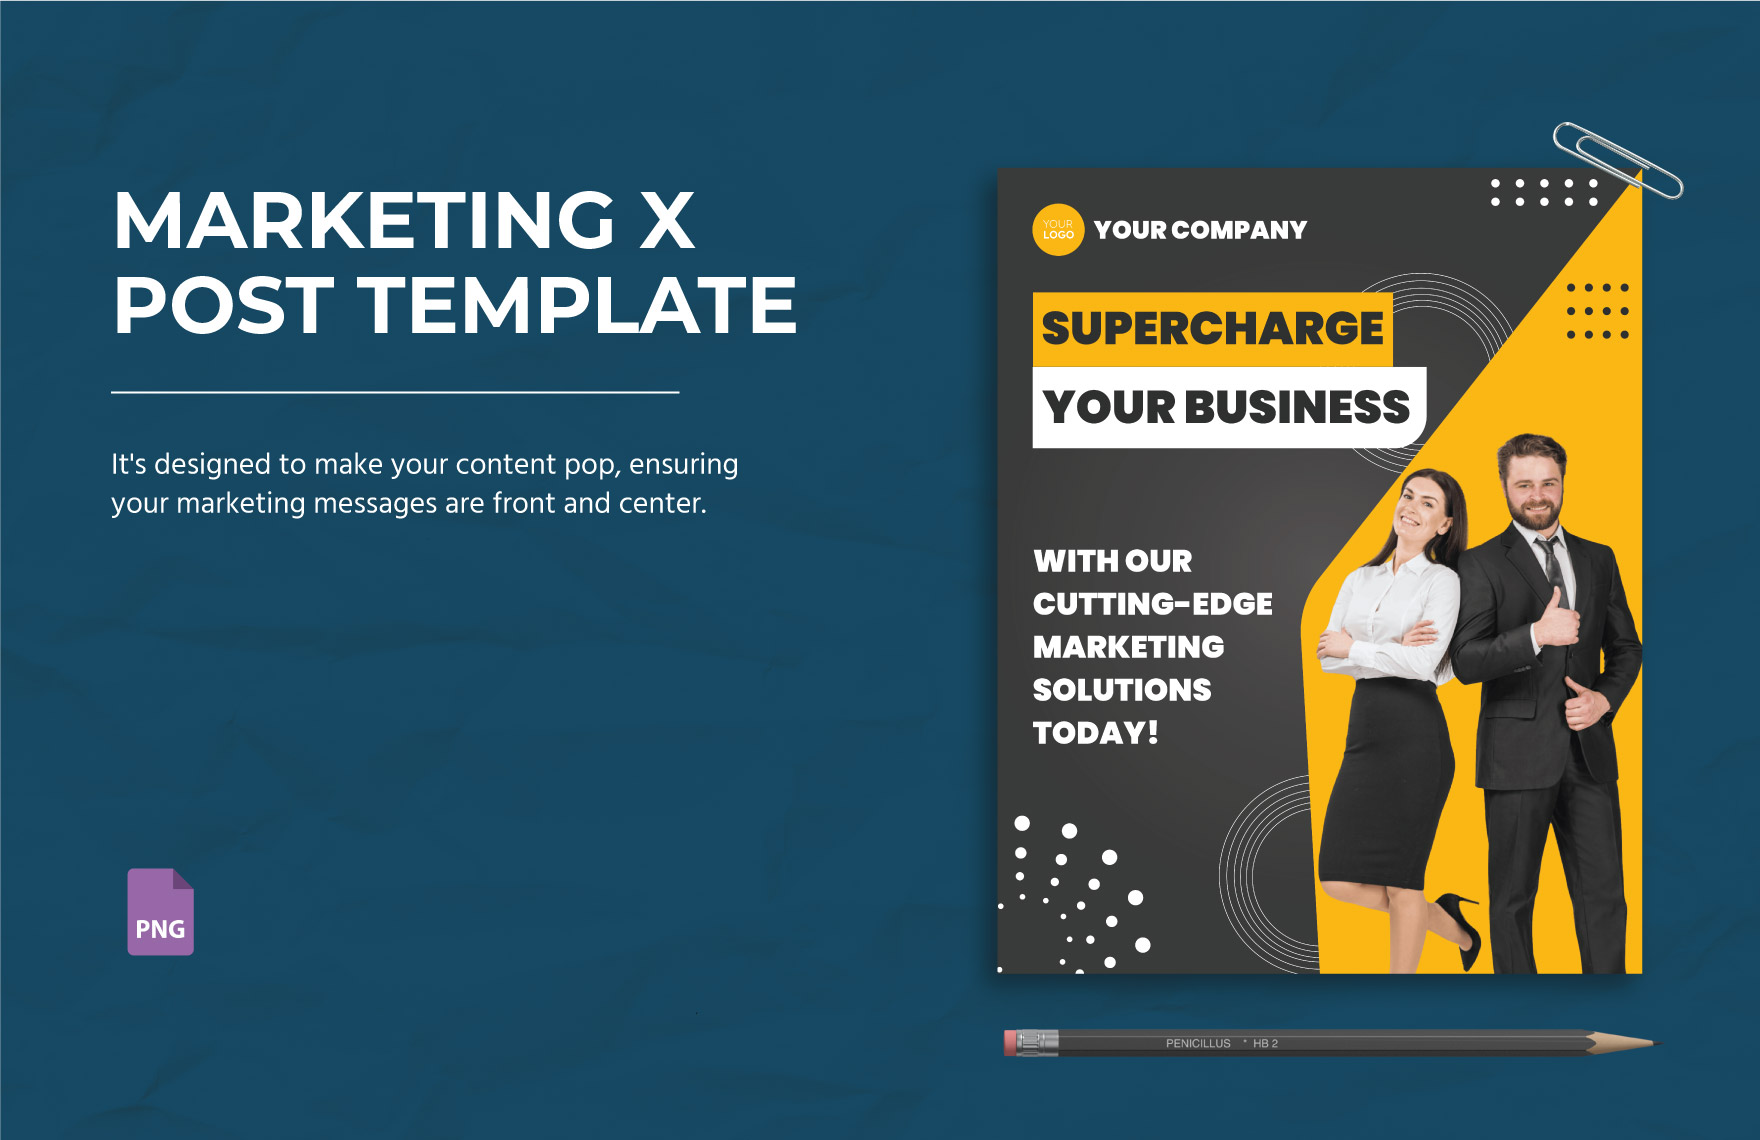 Marketing X Post Template in PNG - Download | Template.net